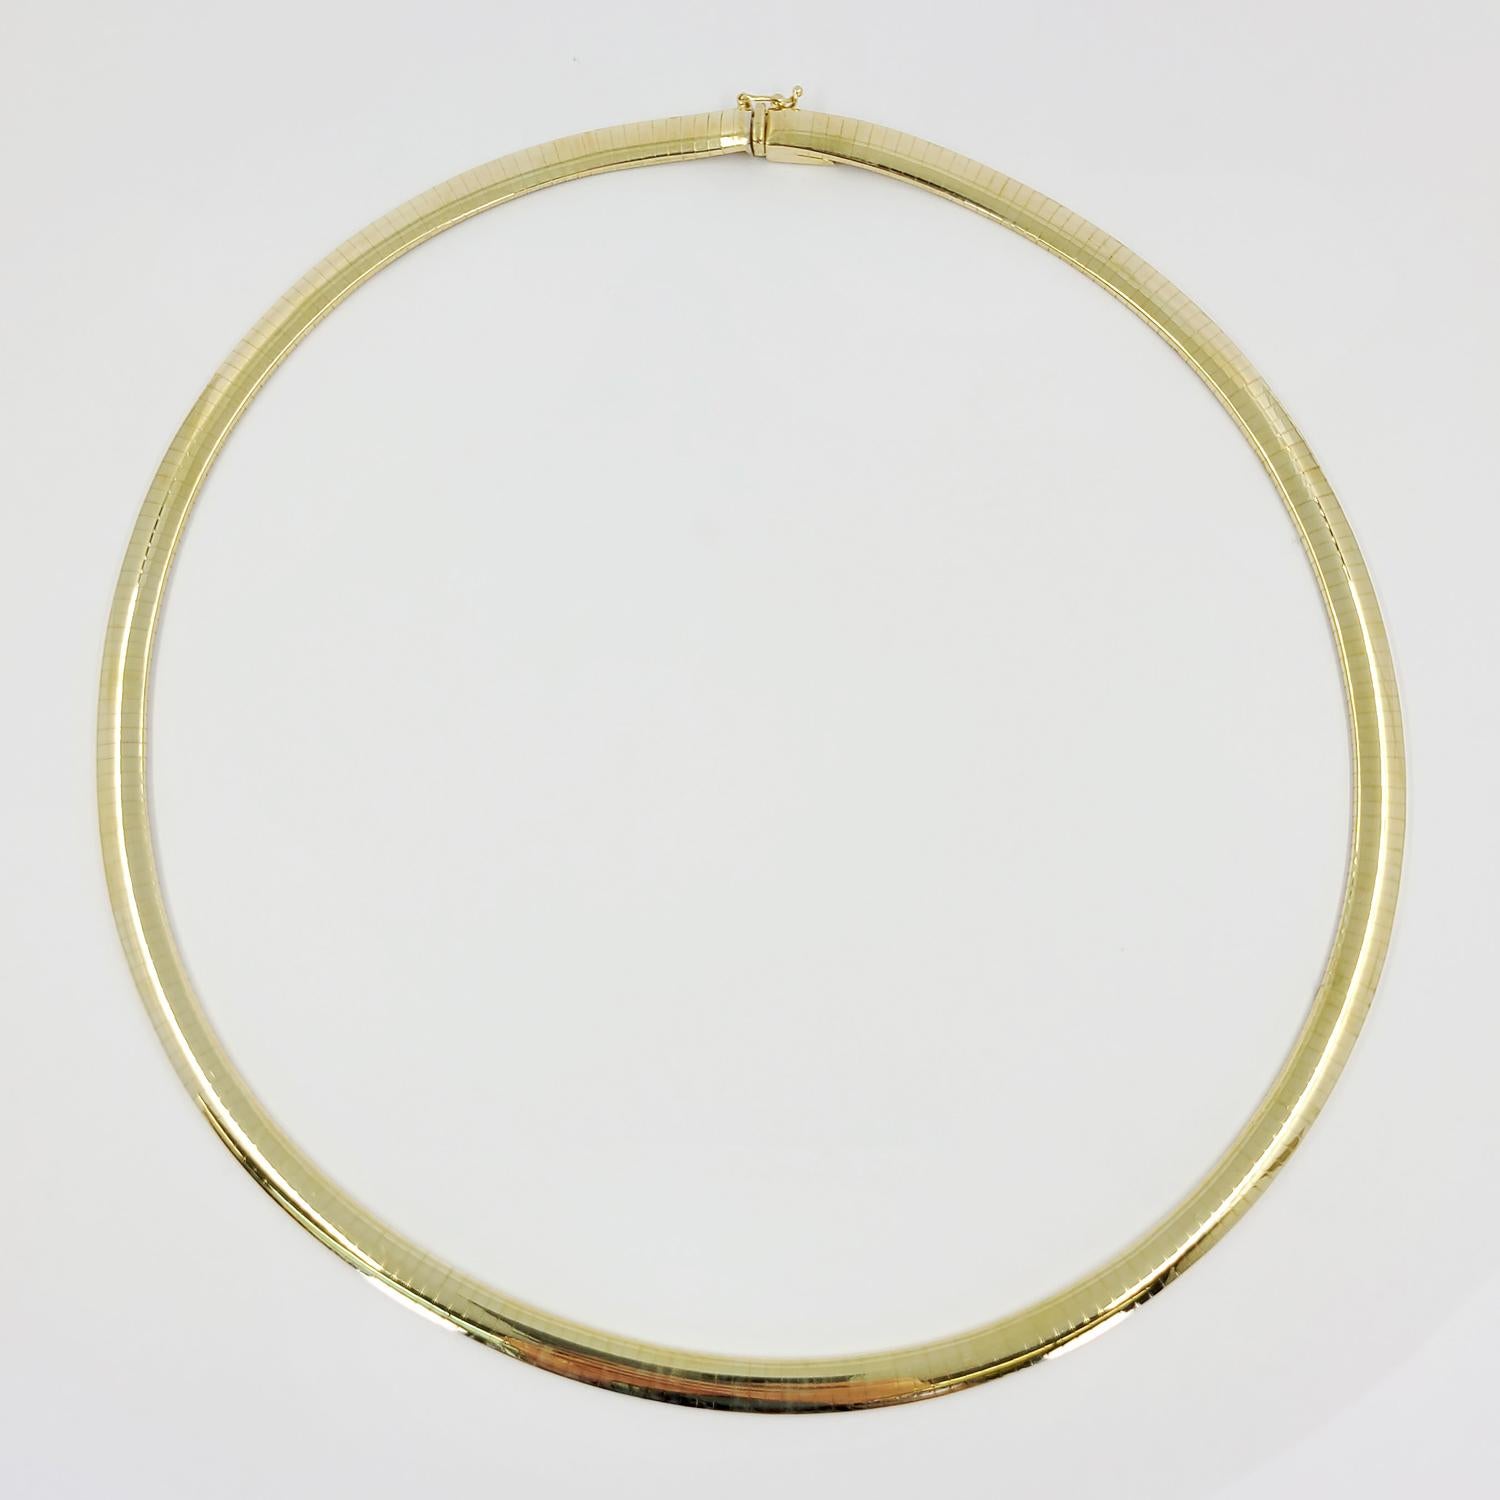 14 Karat Yellow Gold 6mm Wide Omega Necklace With High Polish Finish. Measuring 18 Inches Long. Great For Layering With Longer Yellow Gold Chains. Box Clasp With Figure 8 Safety. Finished Weight Is 41.9 Grams.